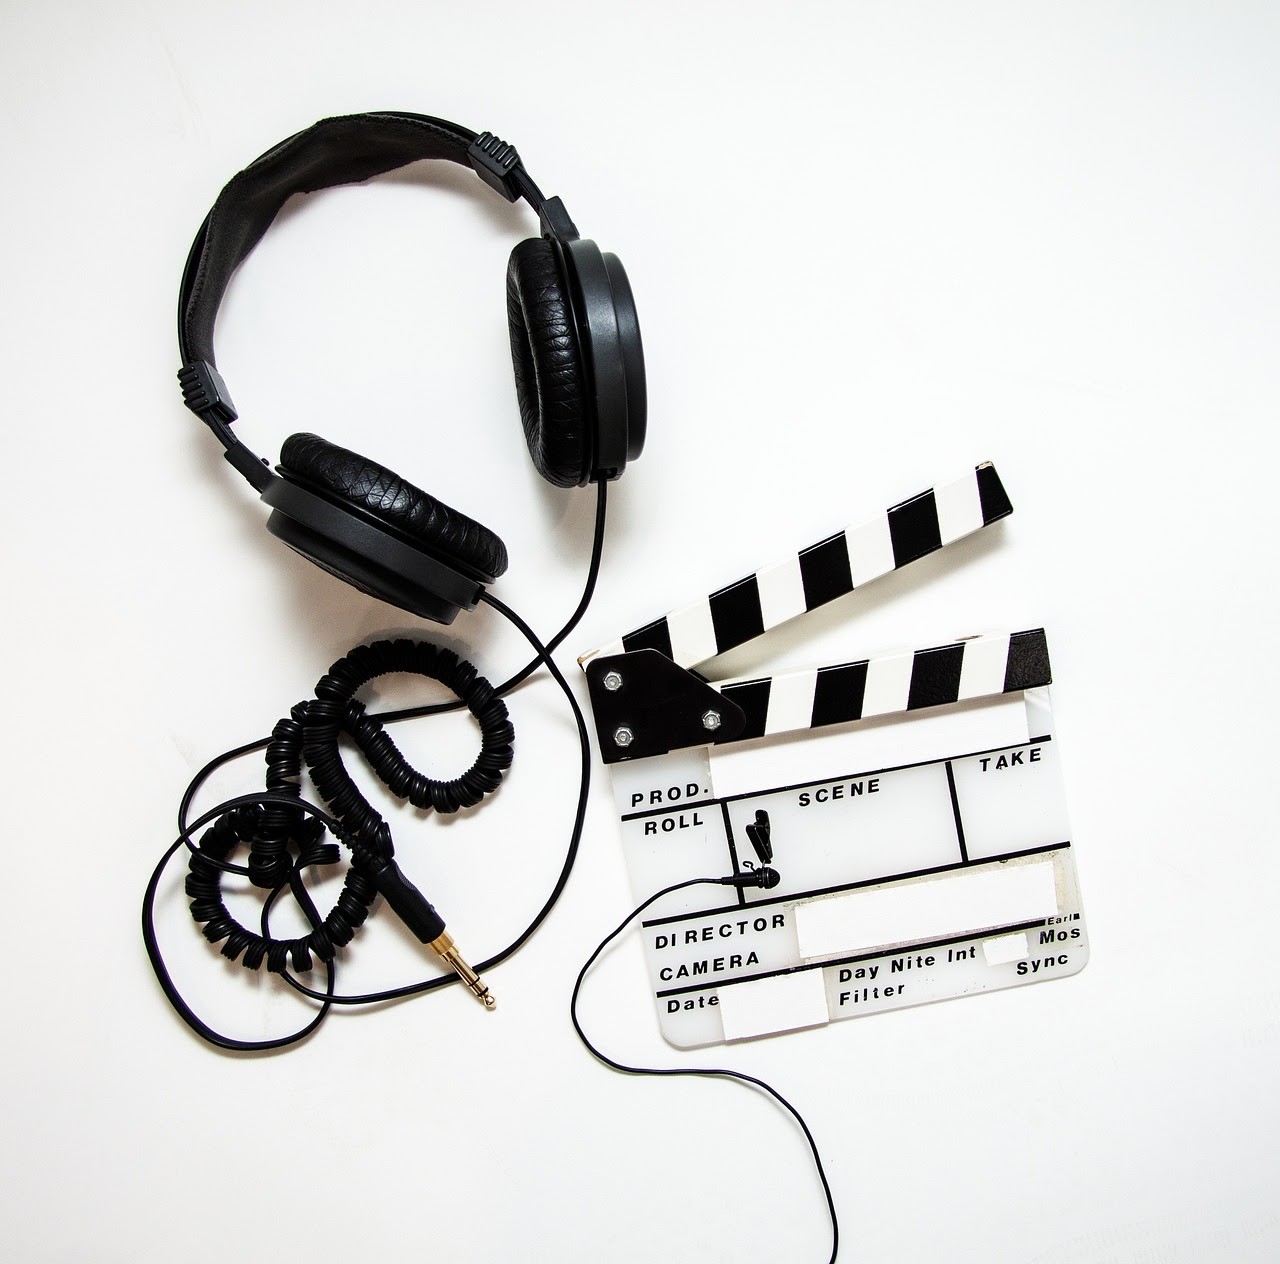 Headphones and a clapperboard